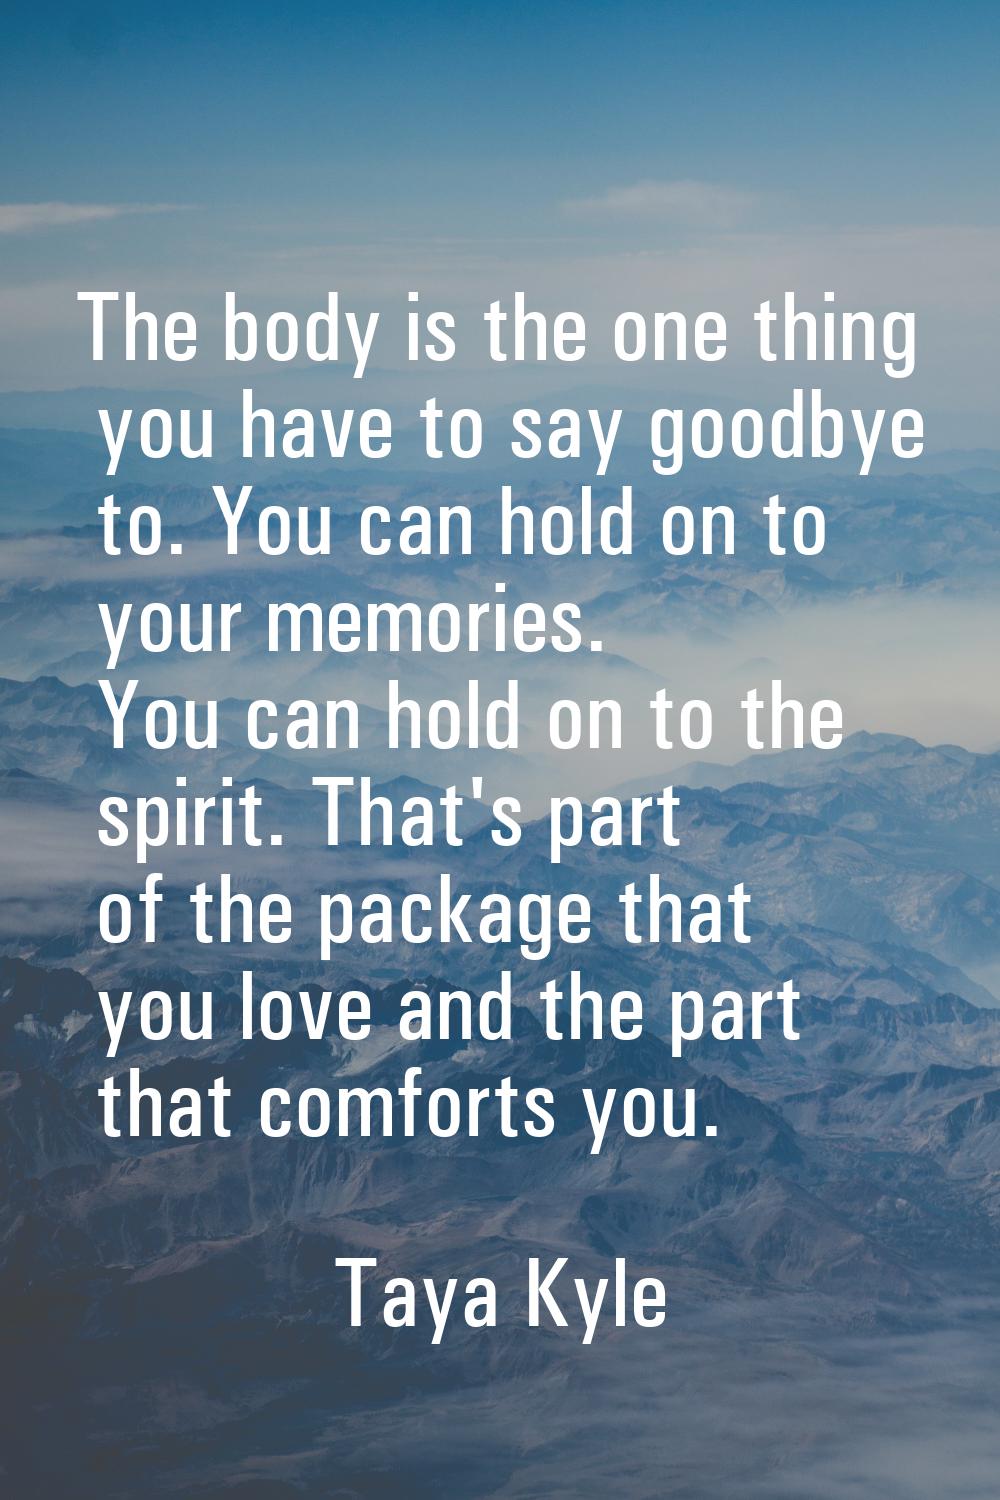 The body is the one thing you have to say goodbye to. You can hold on to your memories. You can hol